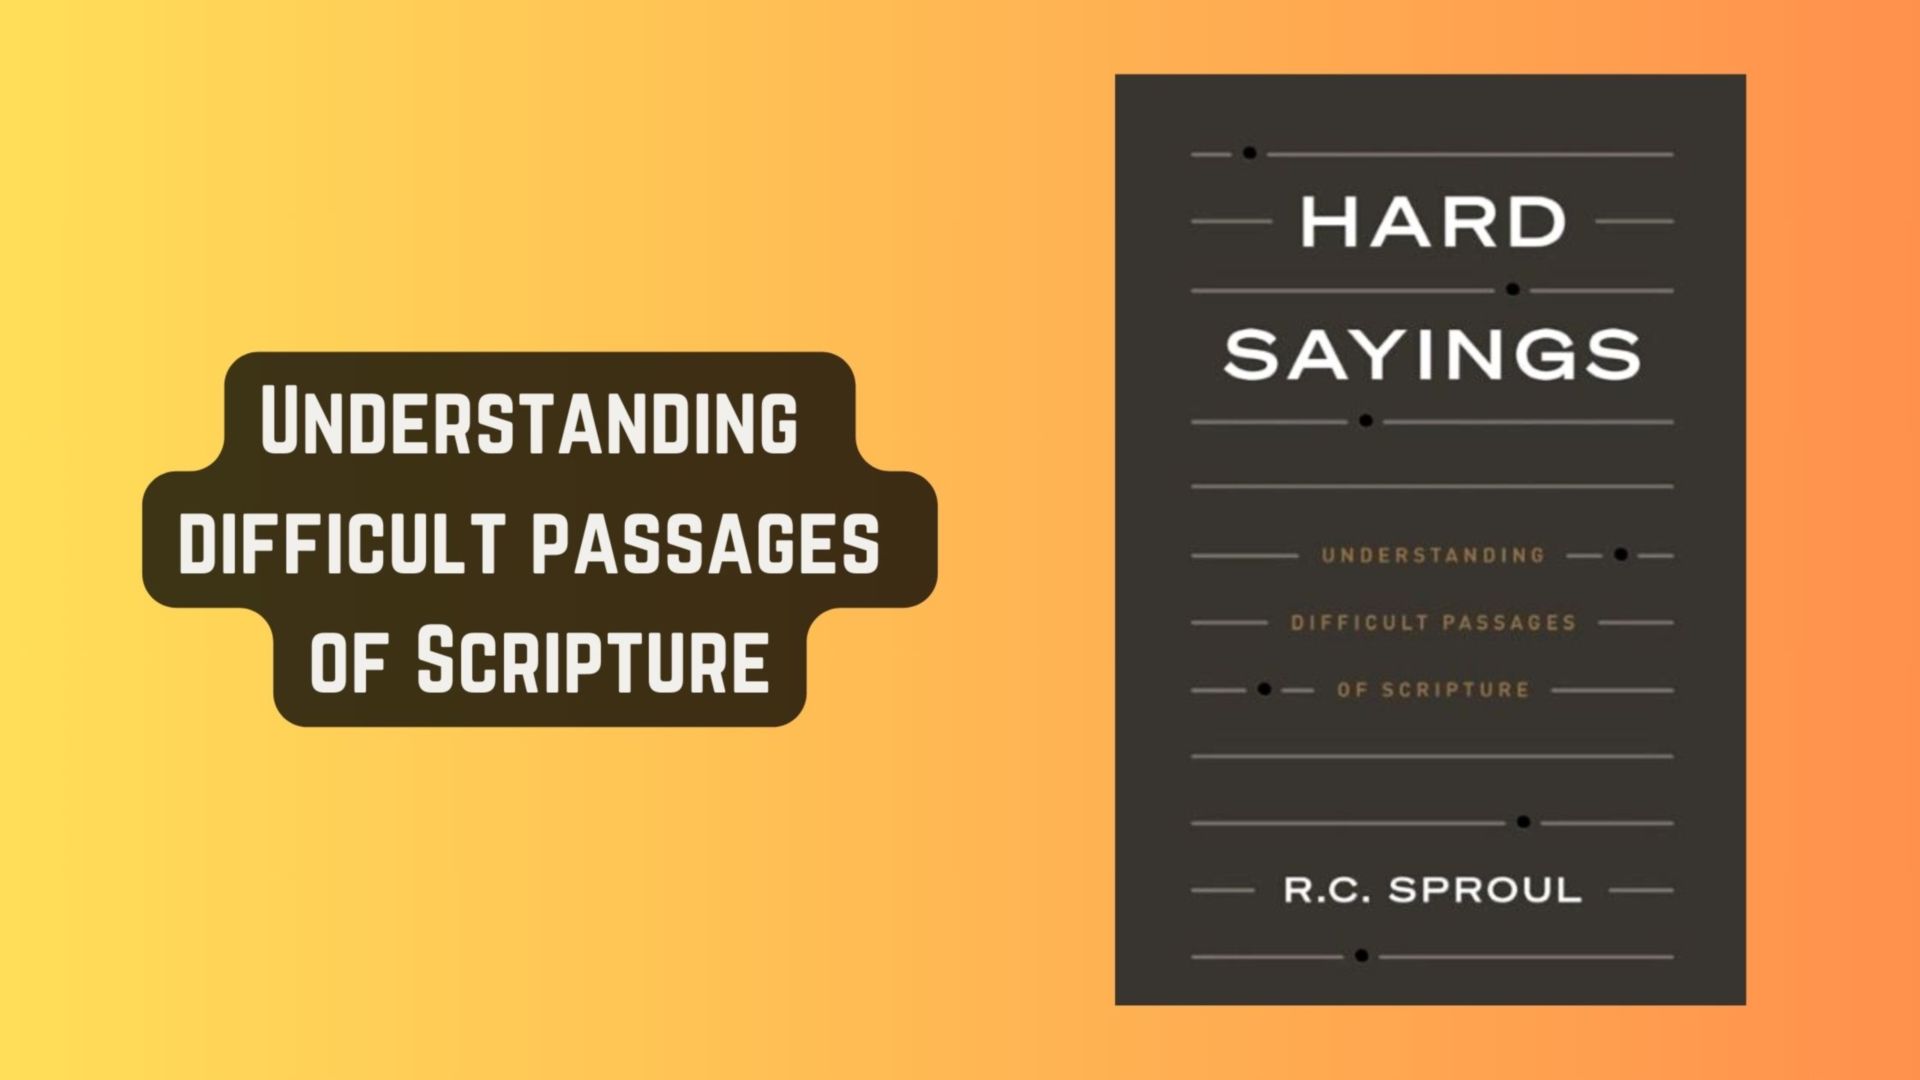 A review of R.C. Sproul's book 'Hard Sayings'